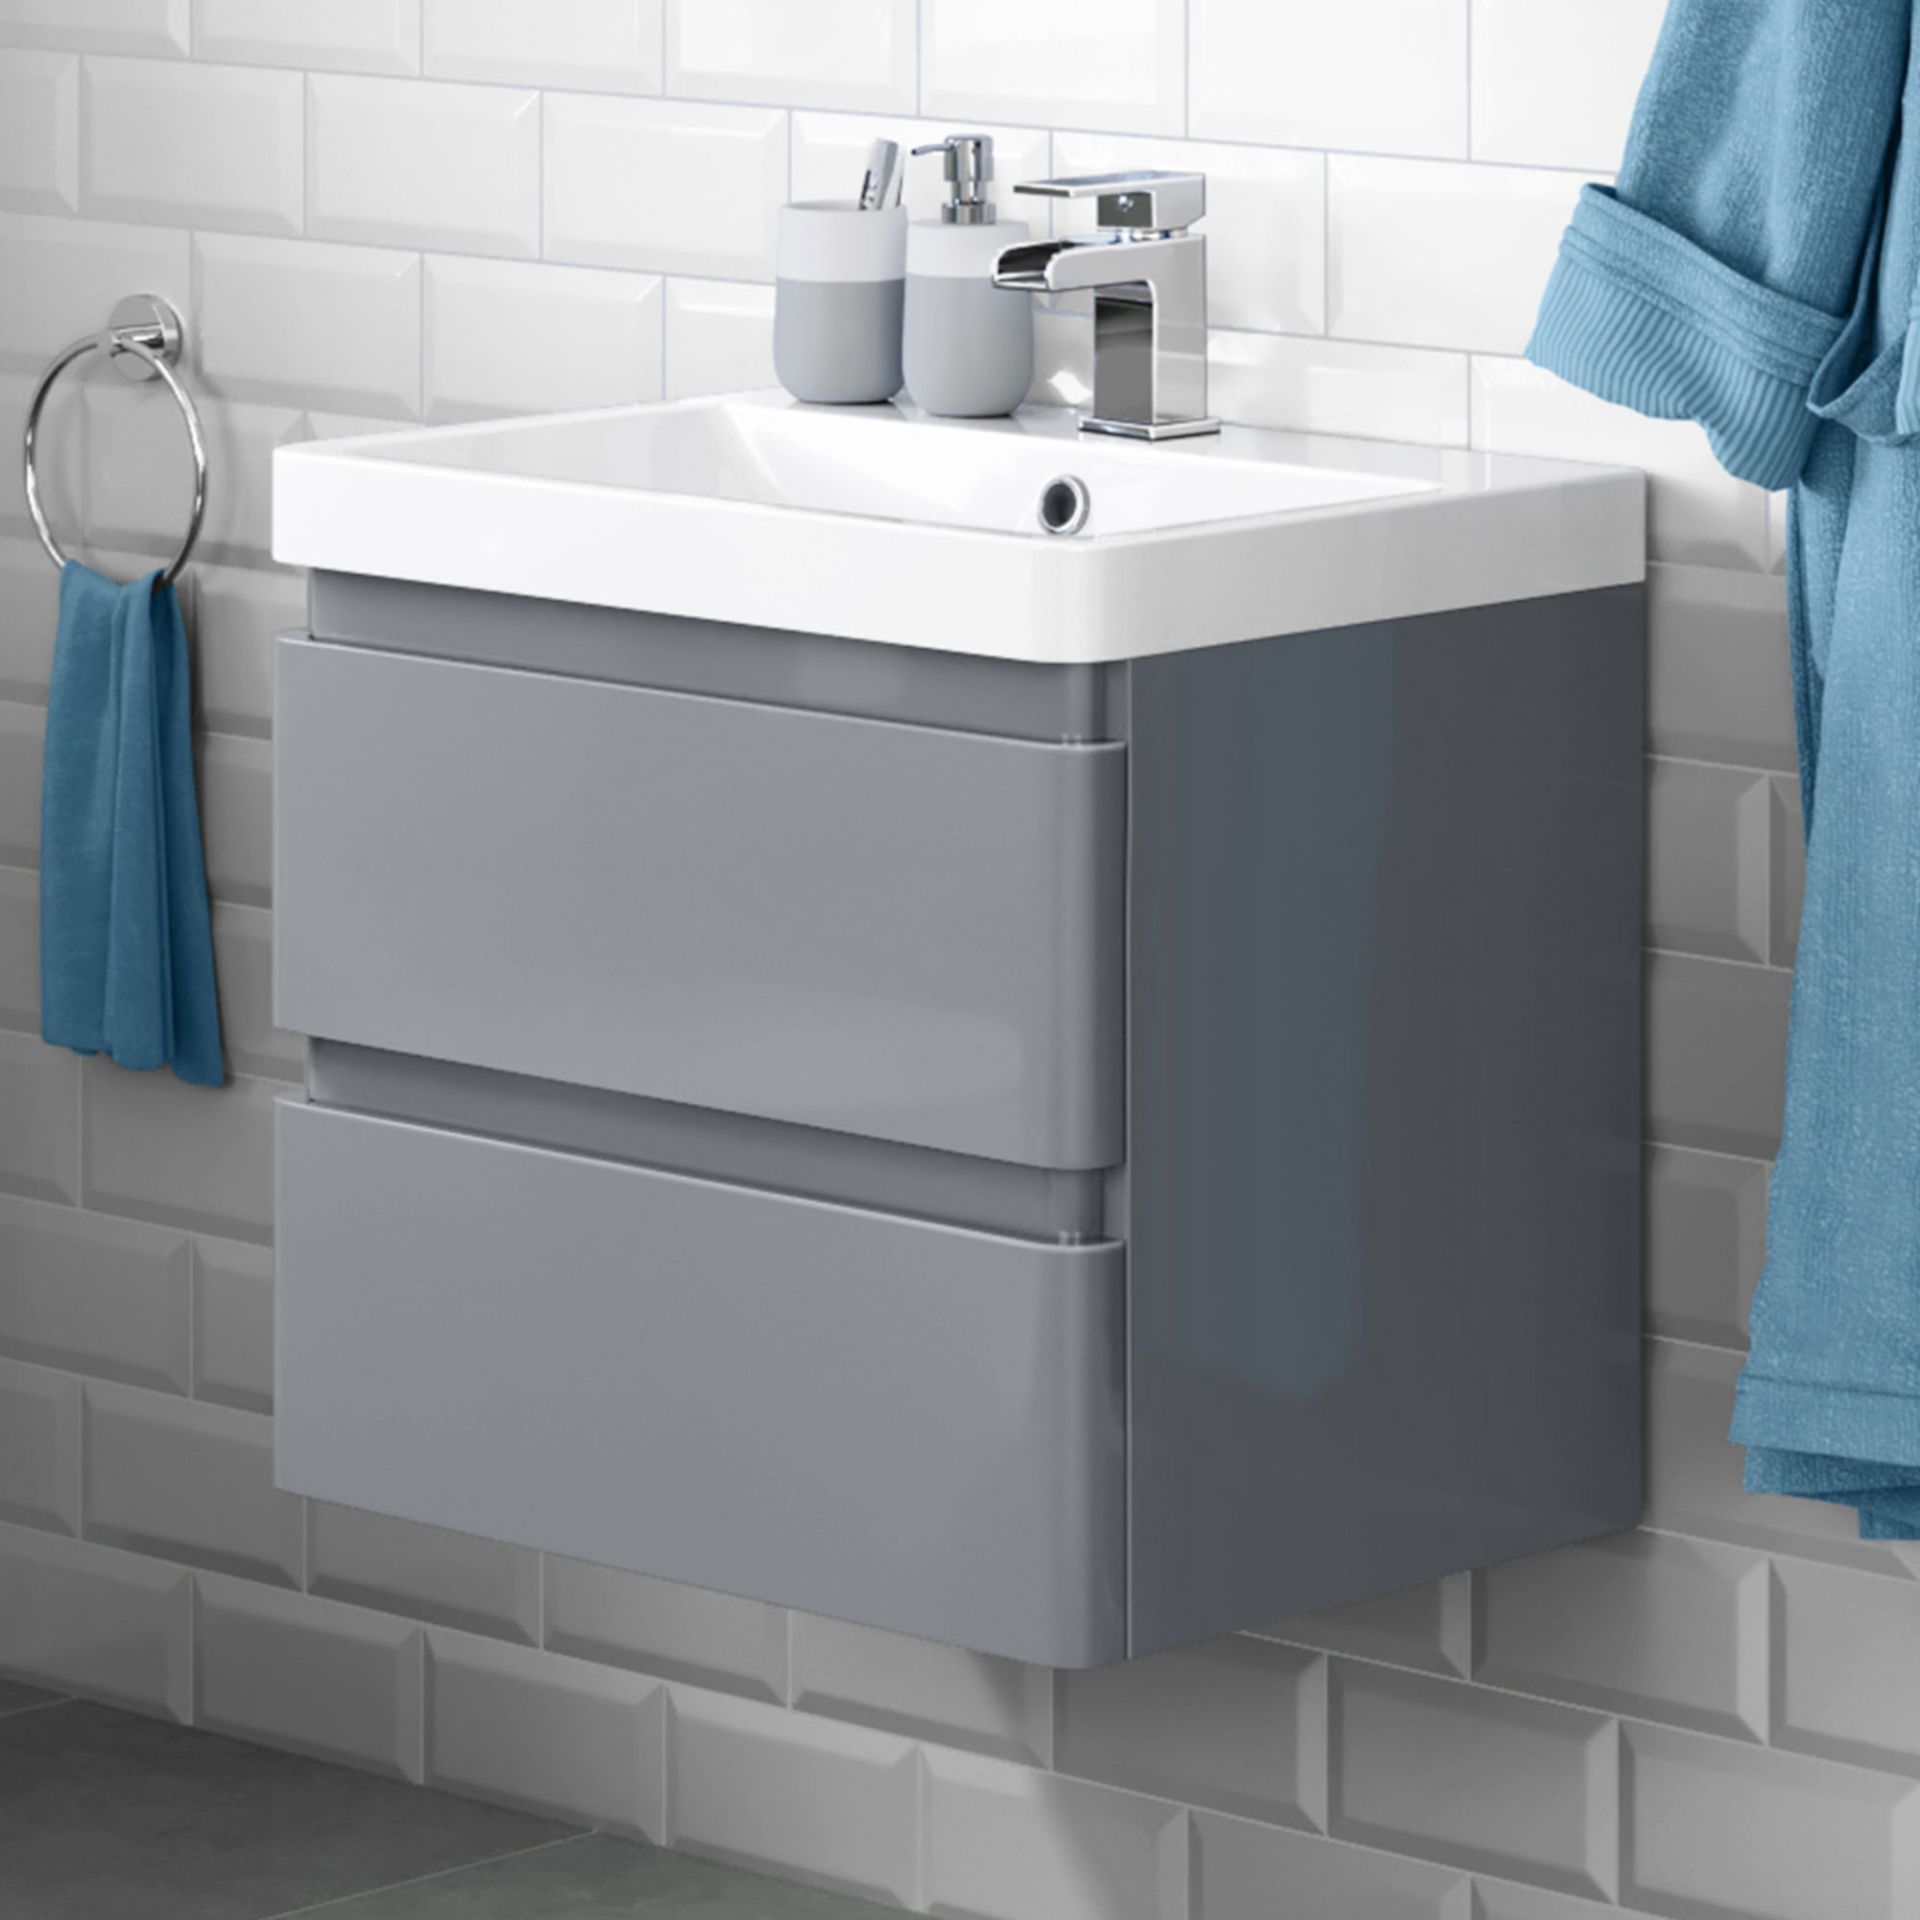 (CT51) 600mm Denver Gloss Grey Built In Basin Drawer Unit - Wall Hung. RRP £254.99. Comes complete